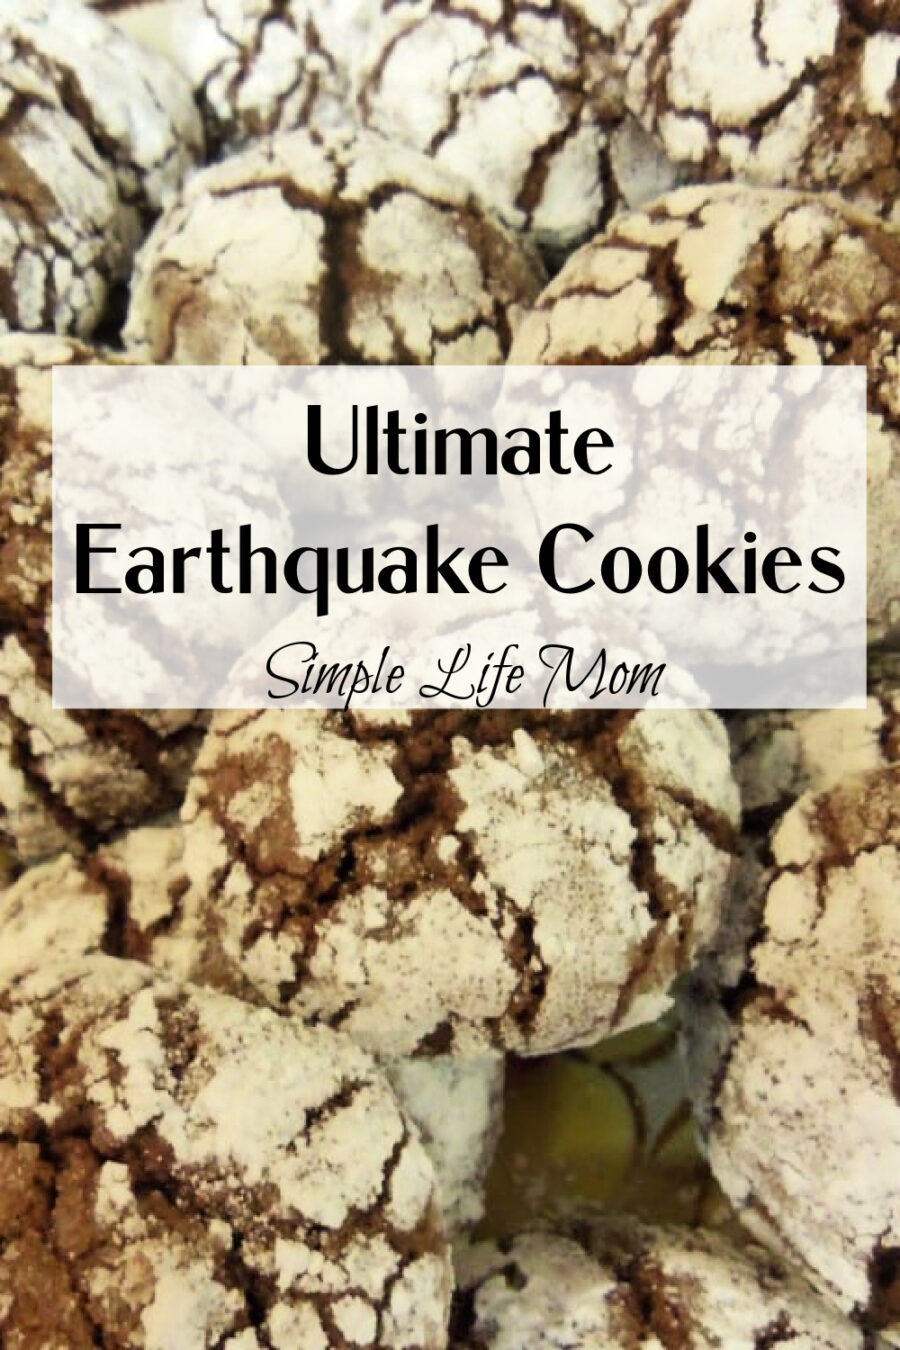 Ultimate Earthquake Cookies from Simple Life Mom